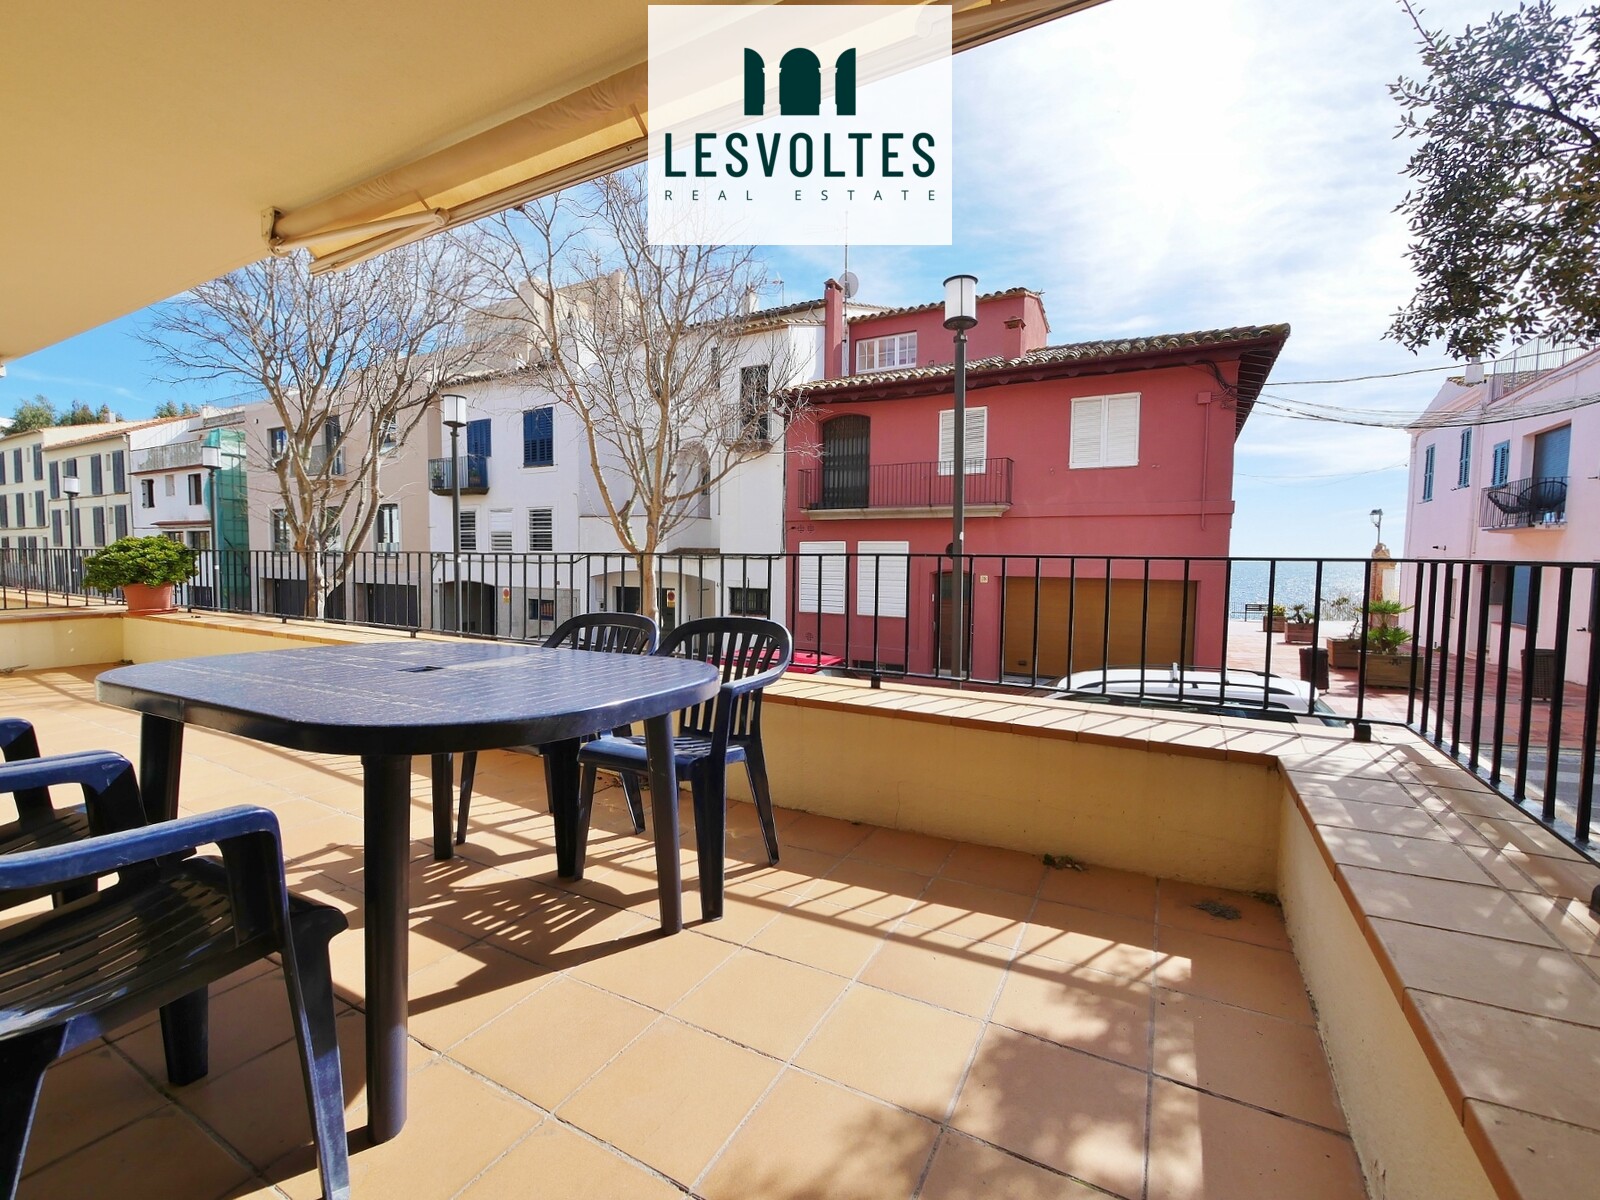 IMPECCABLE APARTMENT WITH TERRACE AND PARTIAL SEA VIEW IN CALELLA DE PALAFRUGELL. EQUIPPED AND WITH PARKING INCLUDED.